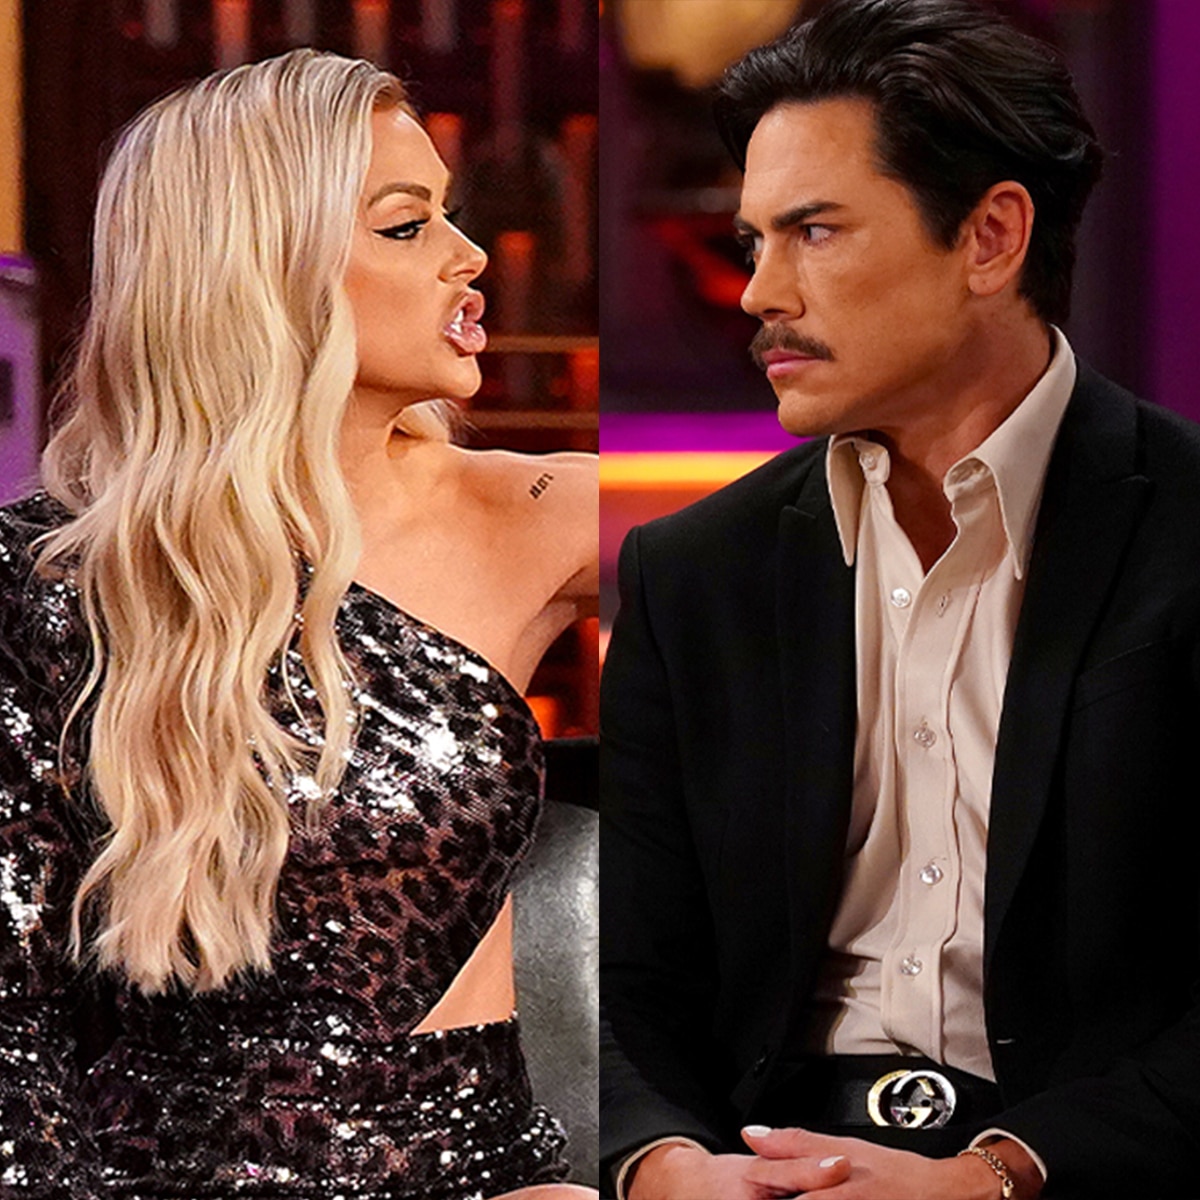 Lala Kent Slams Tom Sandoval Over Comment He Made About Her Daughter